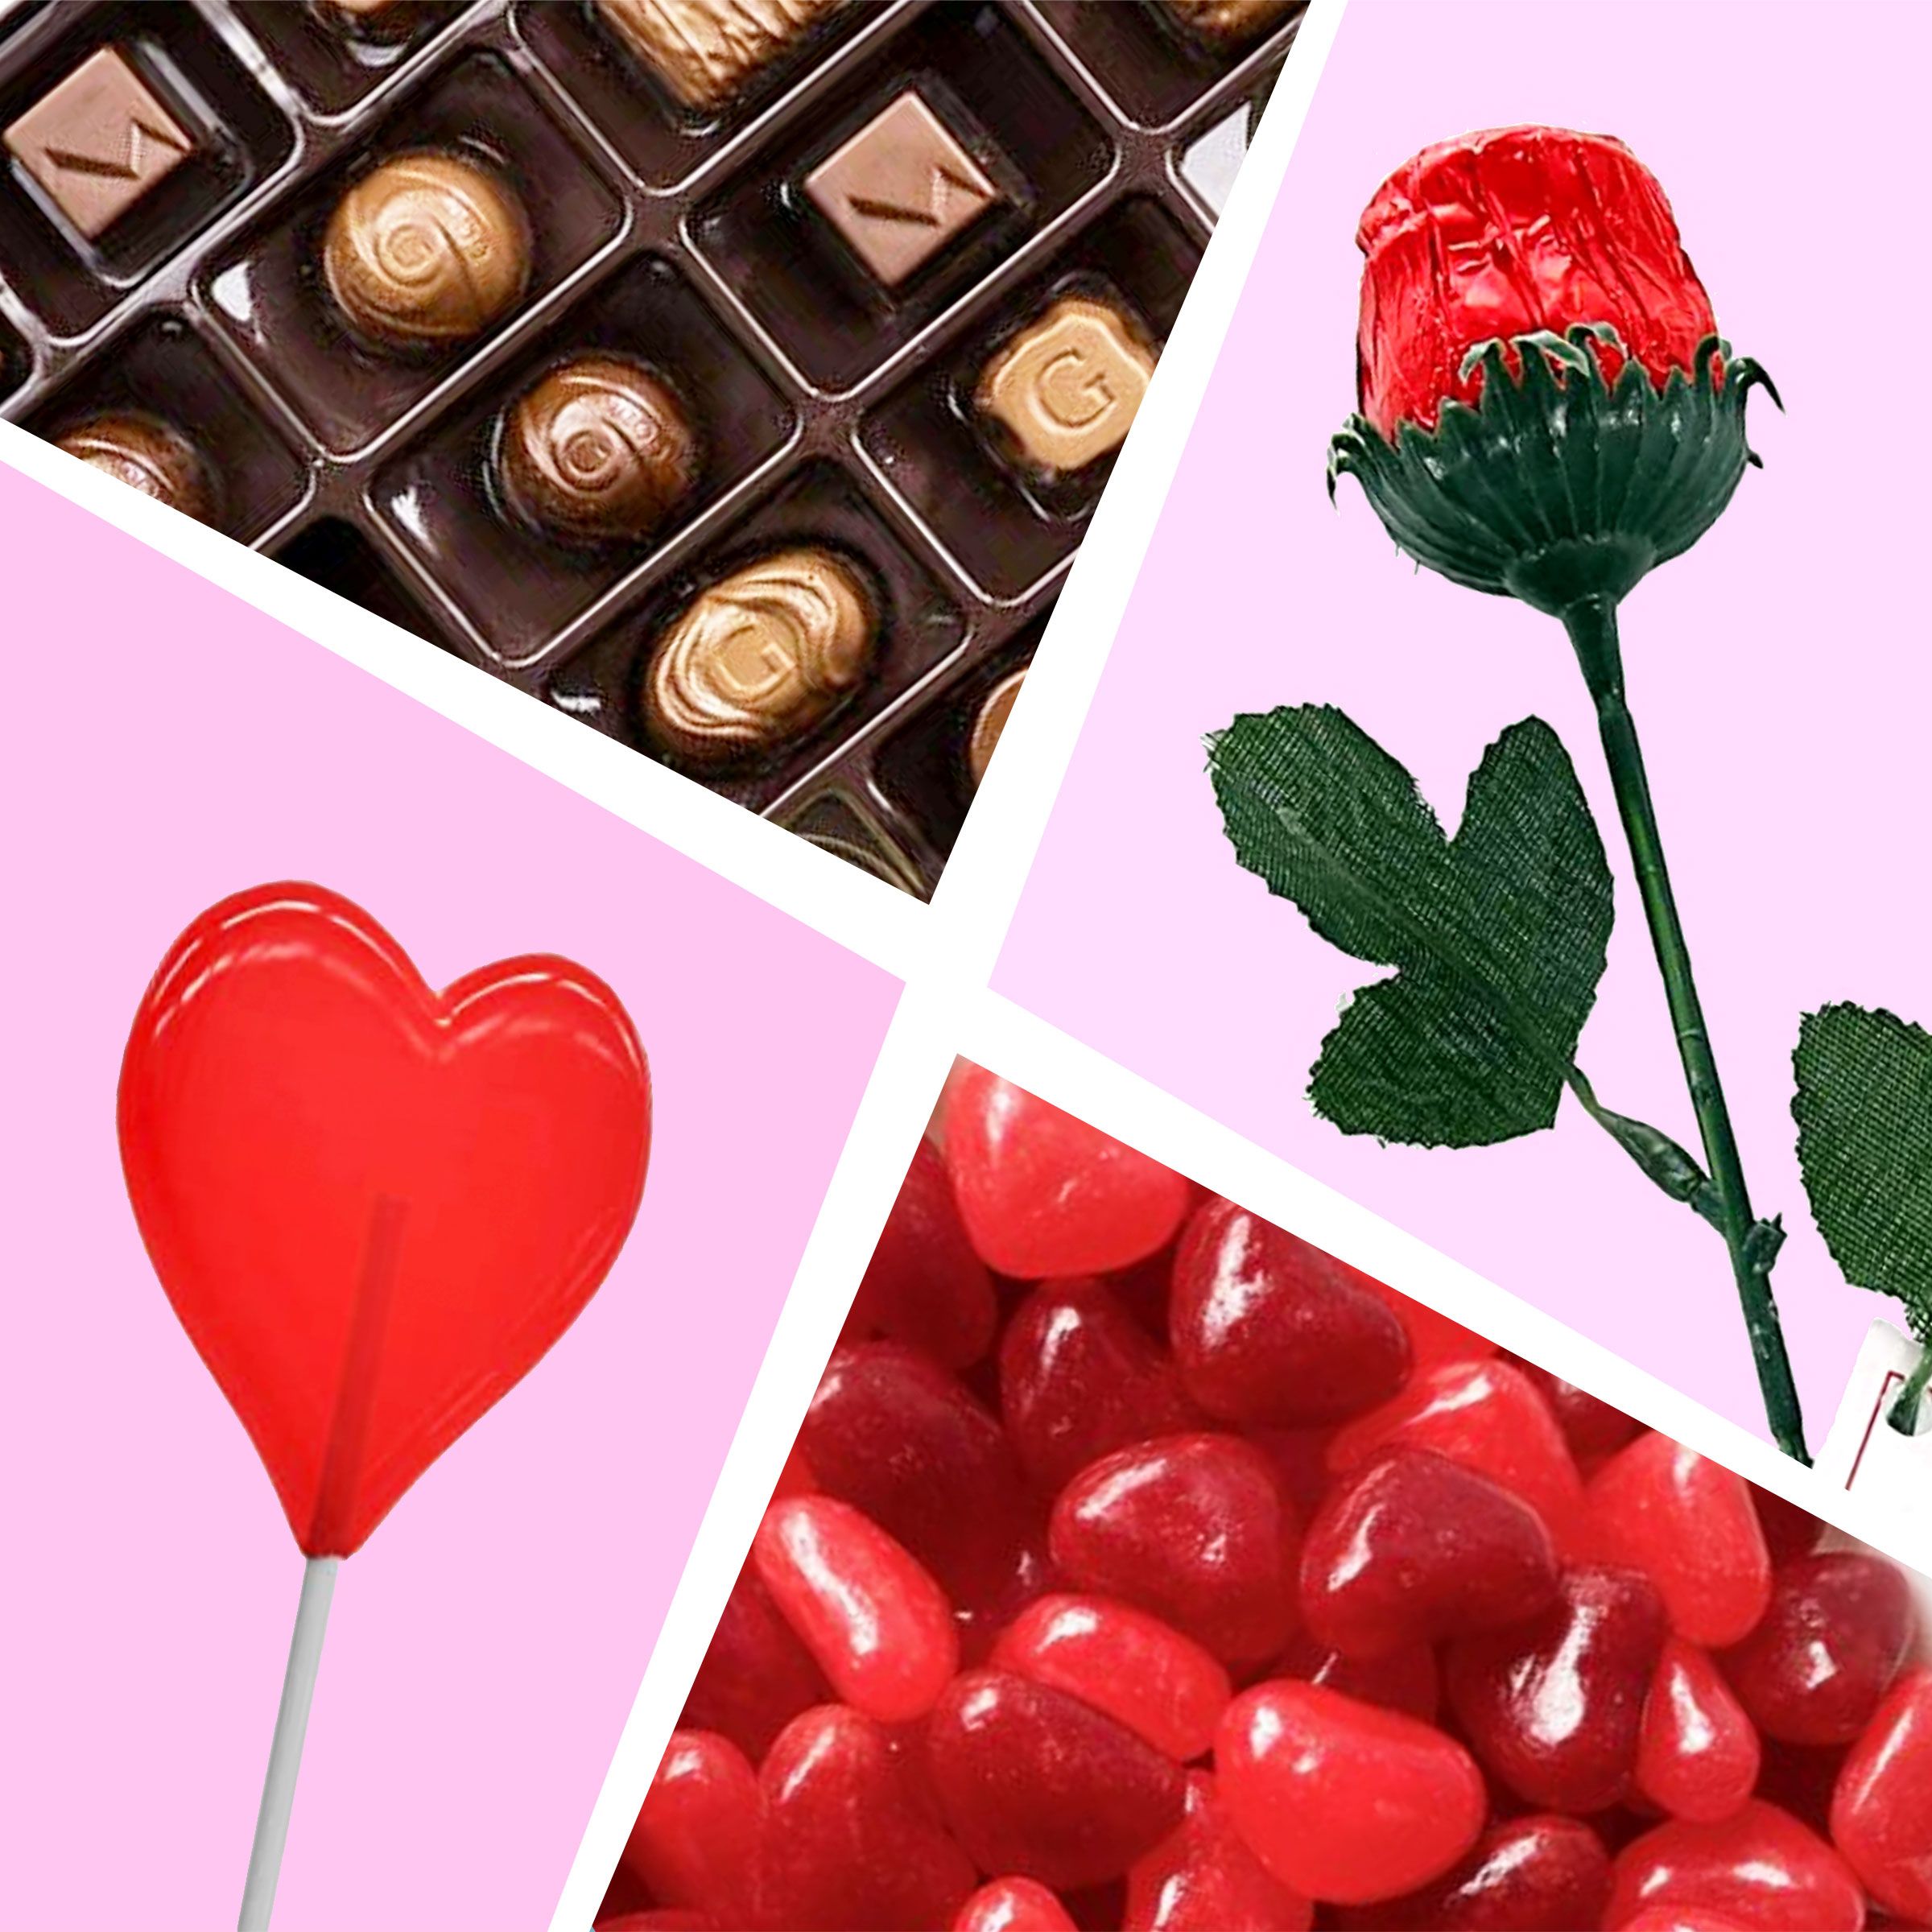 No Sweethearts this Valentine's Day as candy company closes